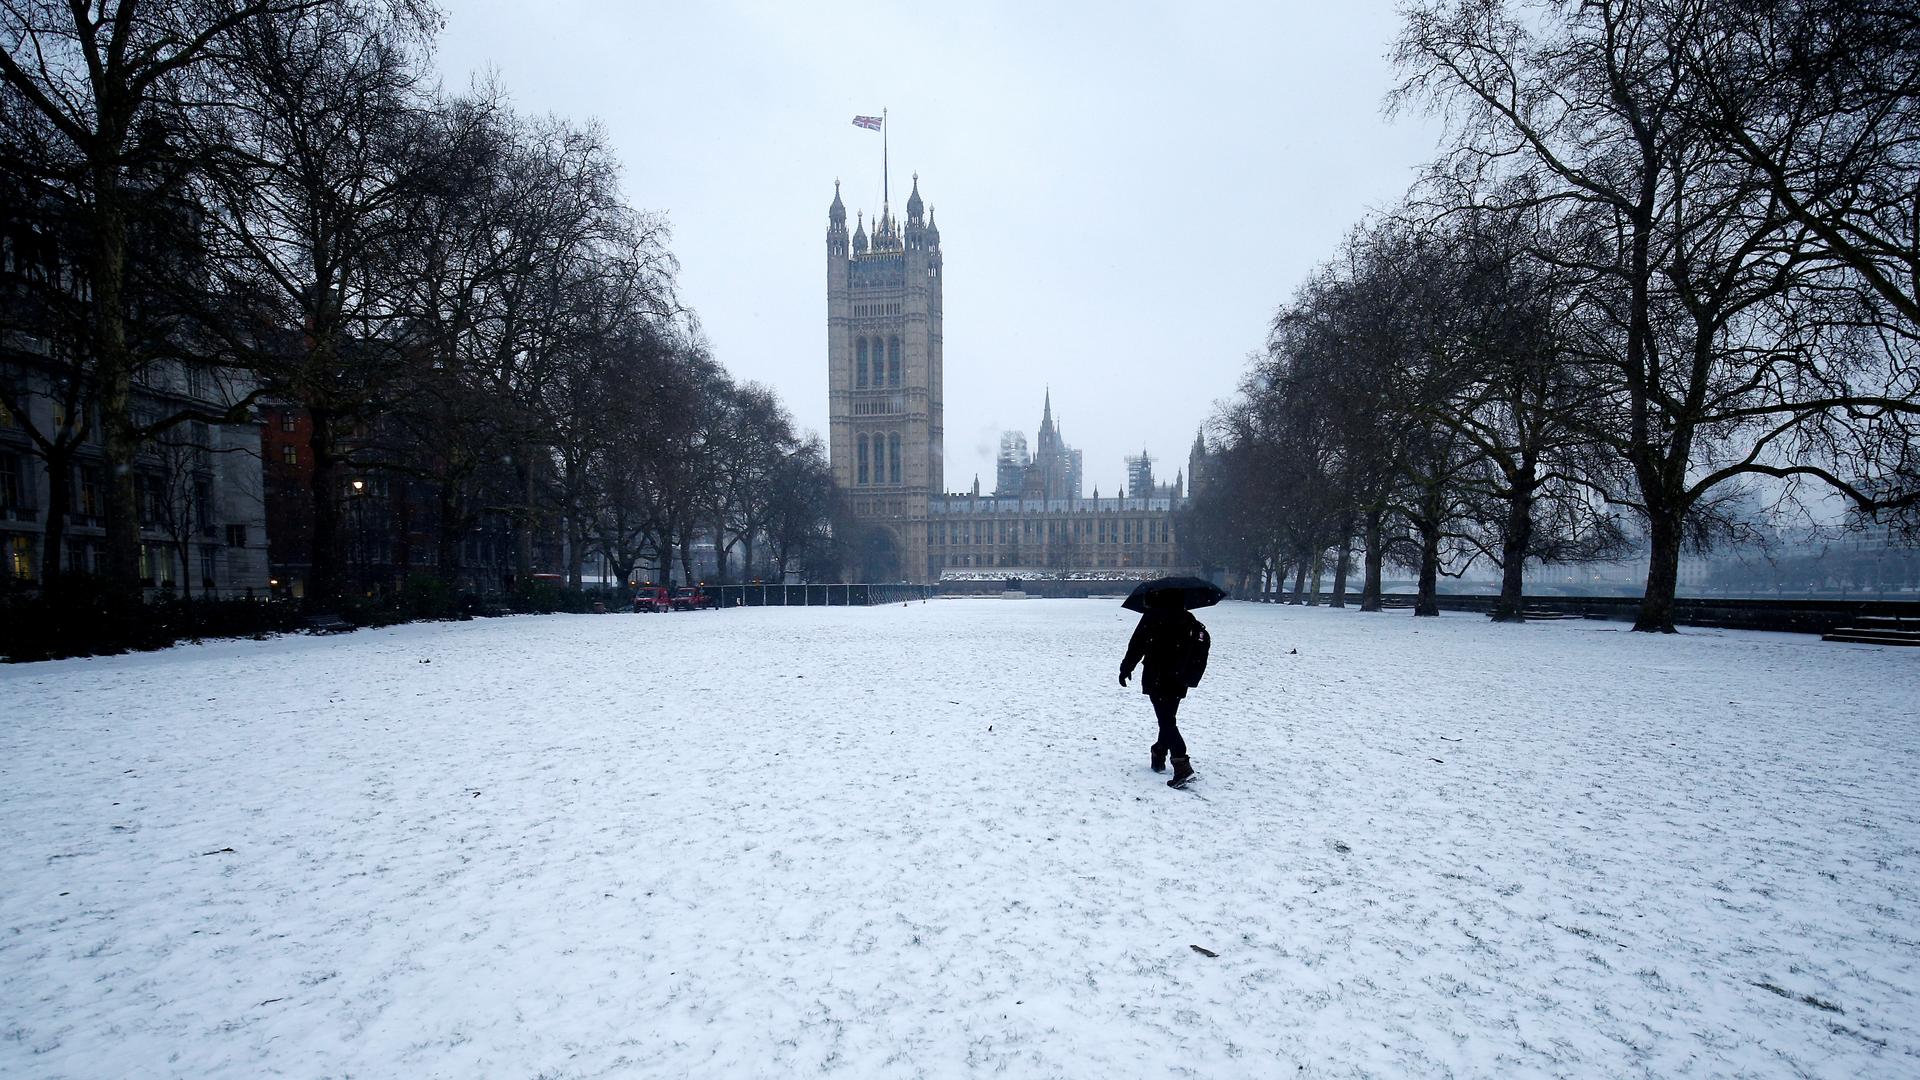 A man walks in the snow next to the Houses of Parliament in London on March 1. Brtain and much of the rest of Europe have been hit with a late winter blast linked to extreme warming in the Arctic.